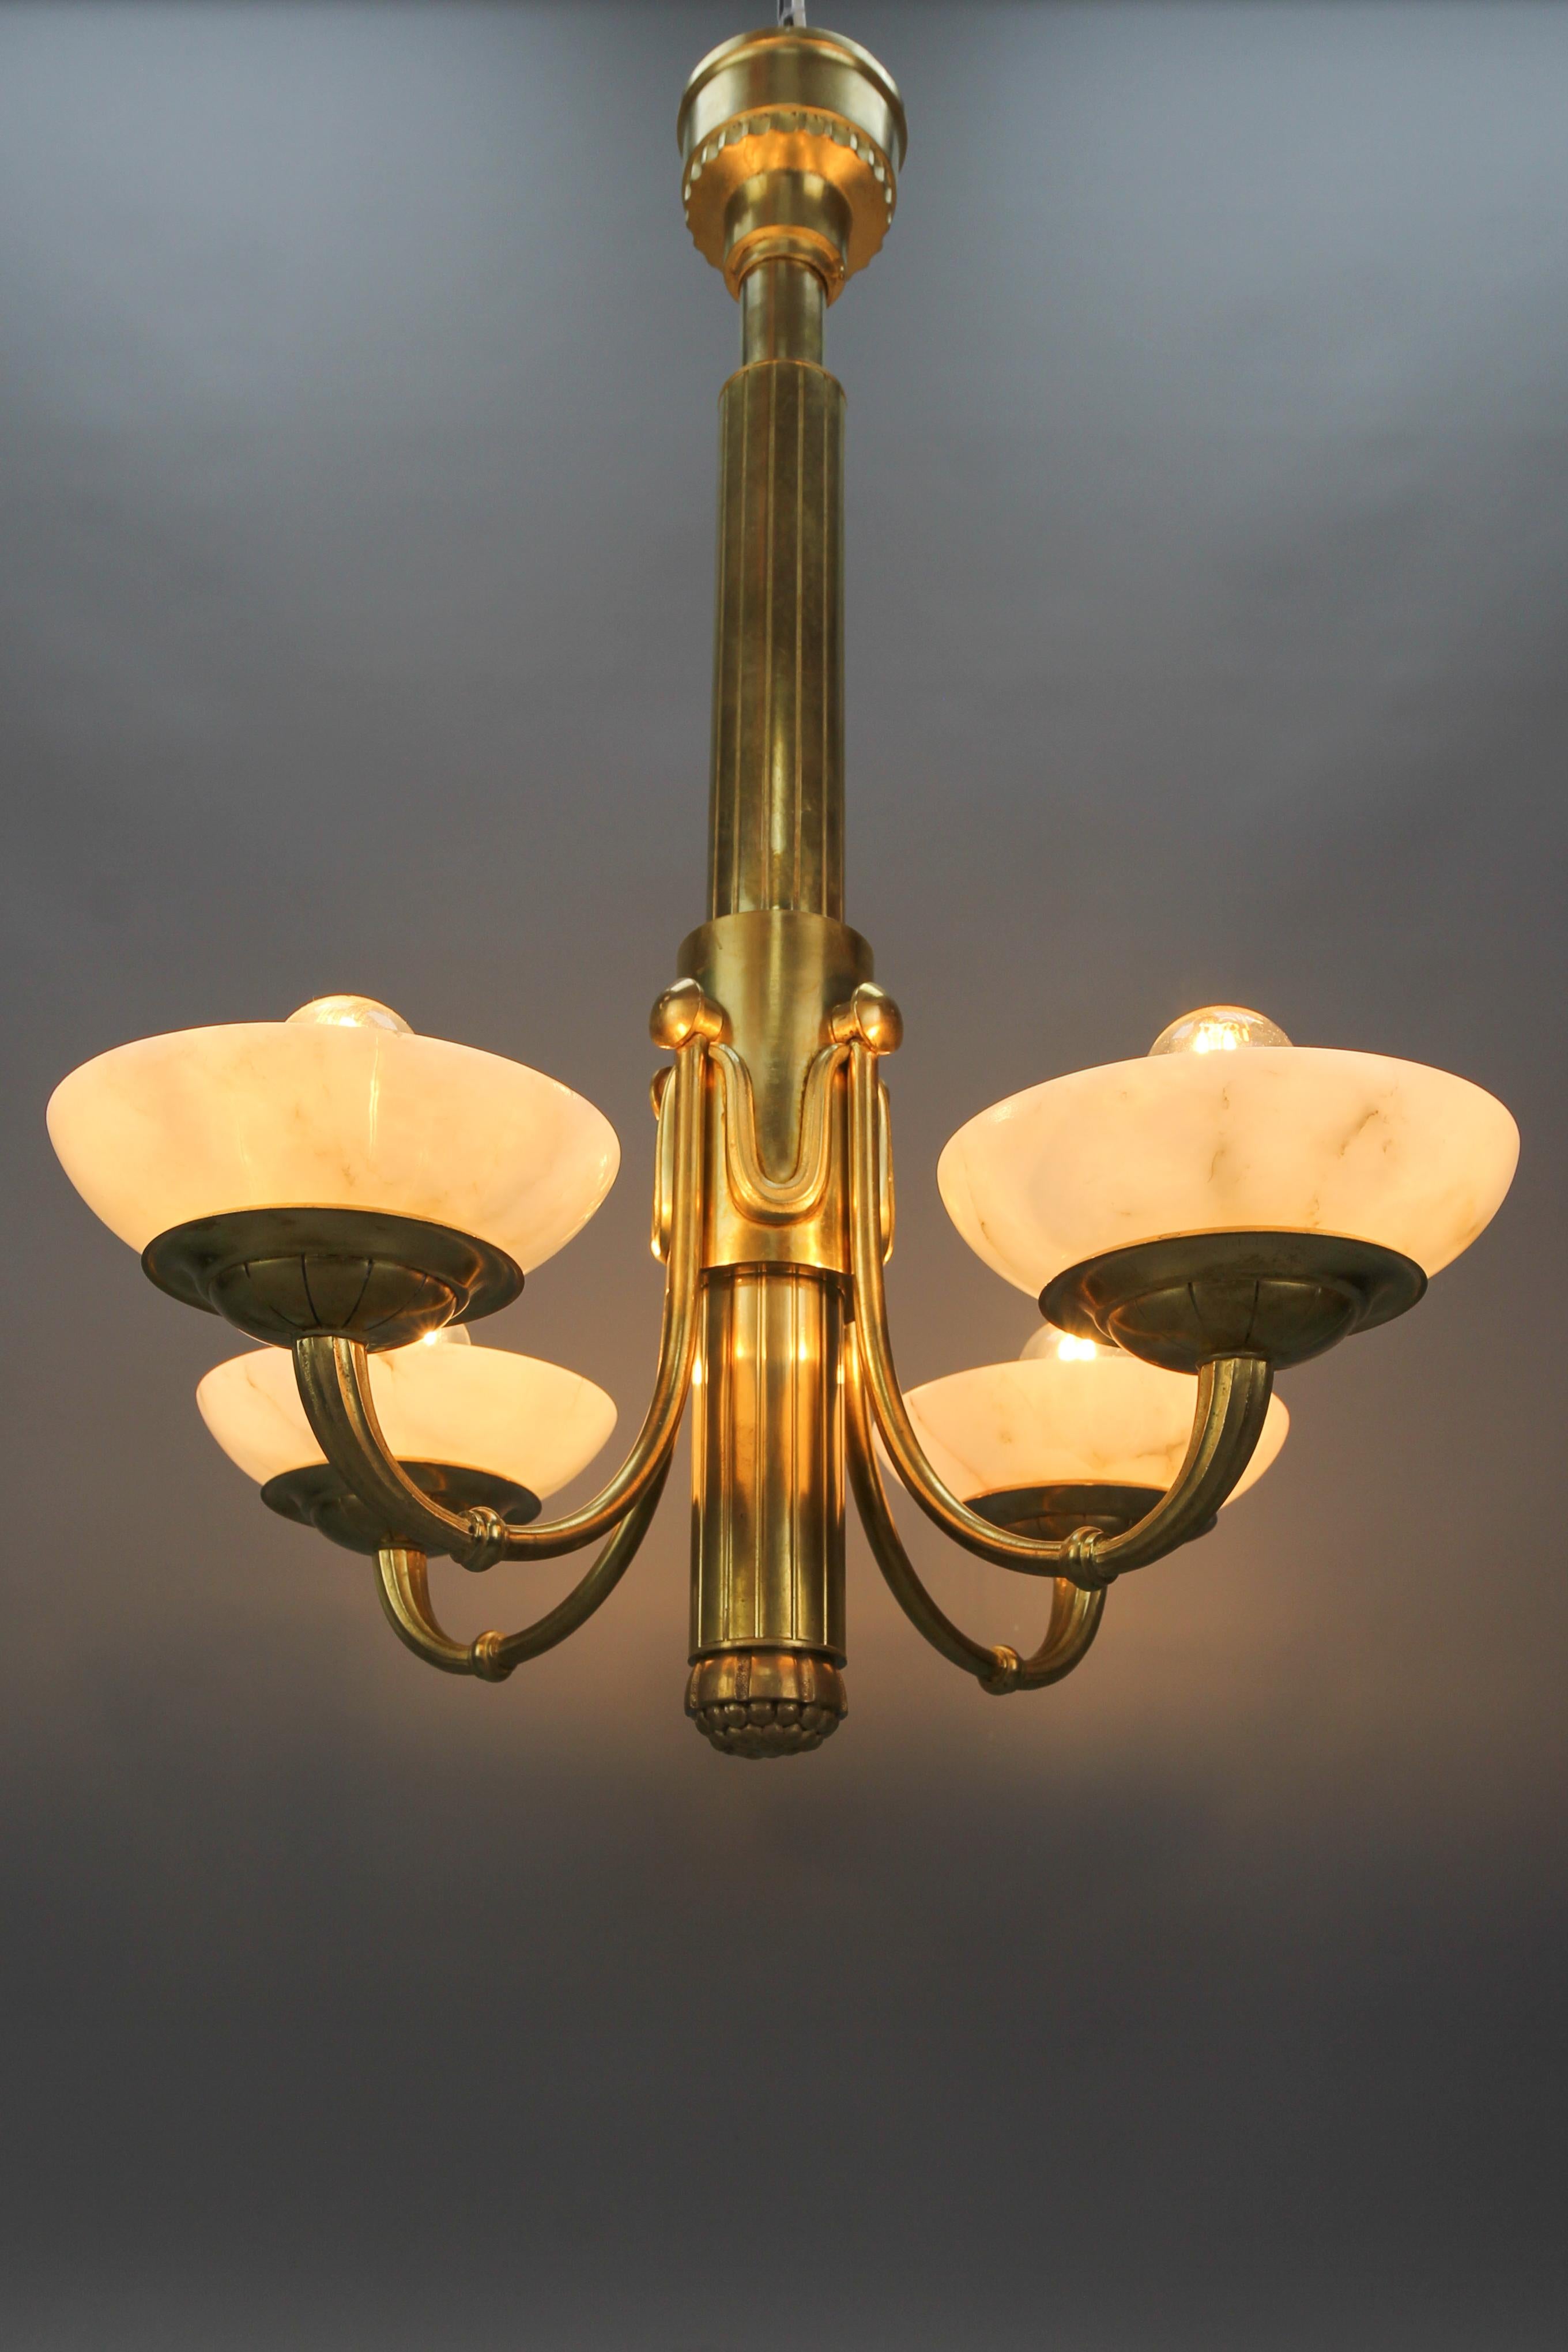 French Art Deco bronze and alabaster four-light chandelier from ca. 1920.
This elegant and classical Art Deco chandelier features a bronze and brass frame - a monumental central stem with four arms, each with a lampshade made of creamy white